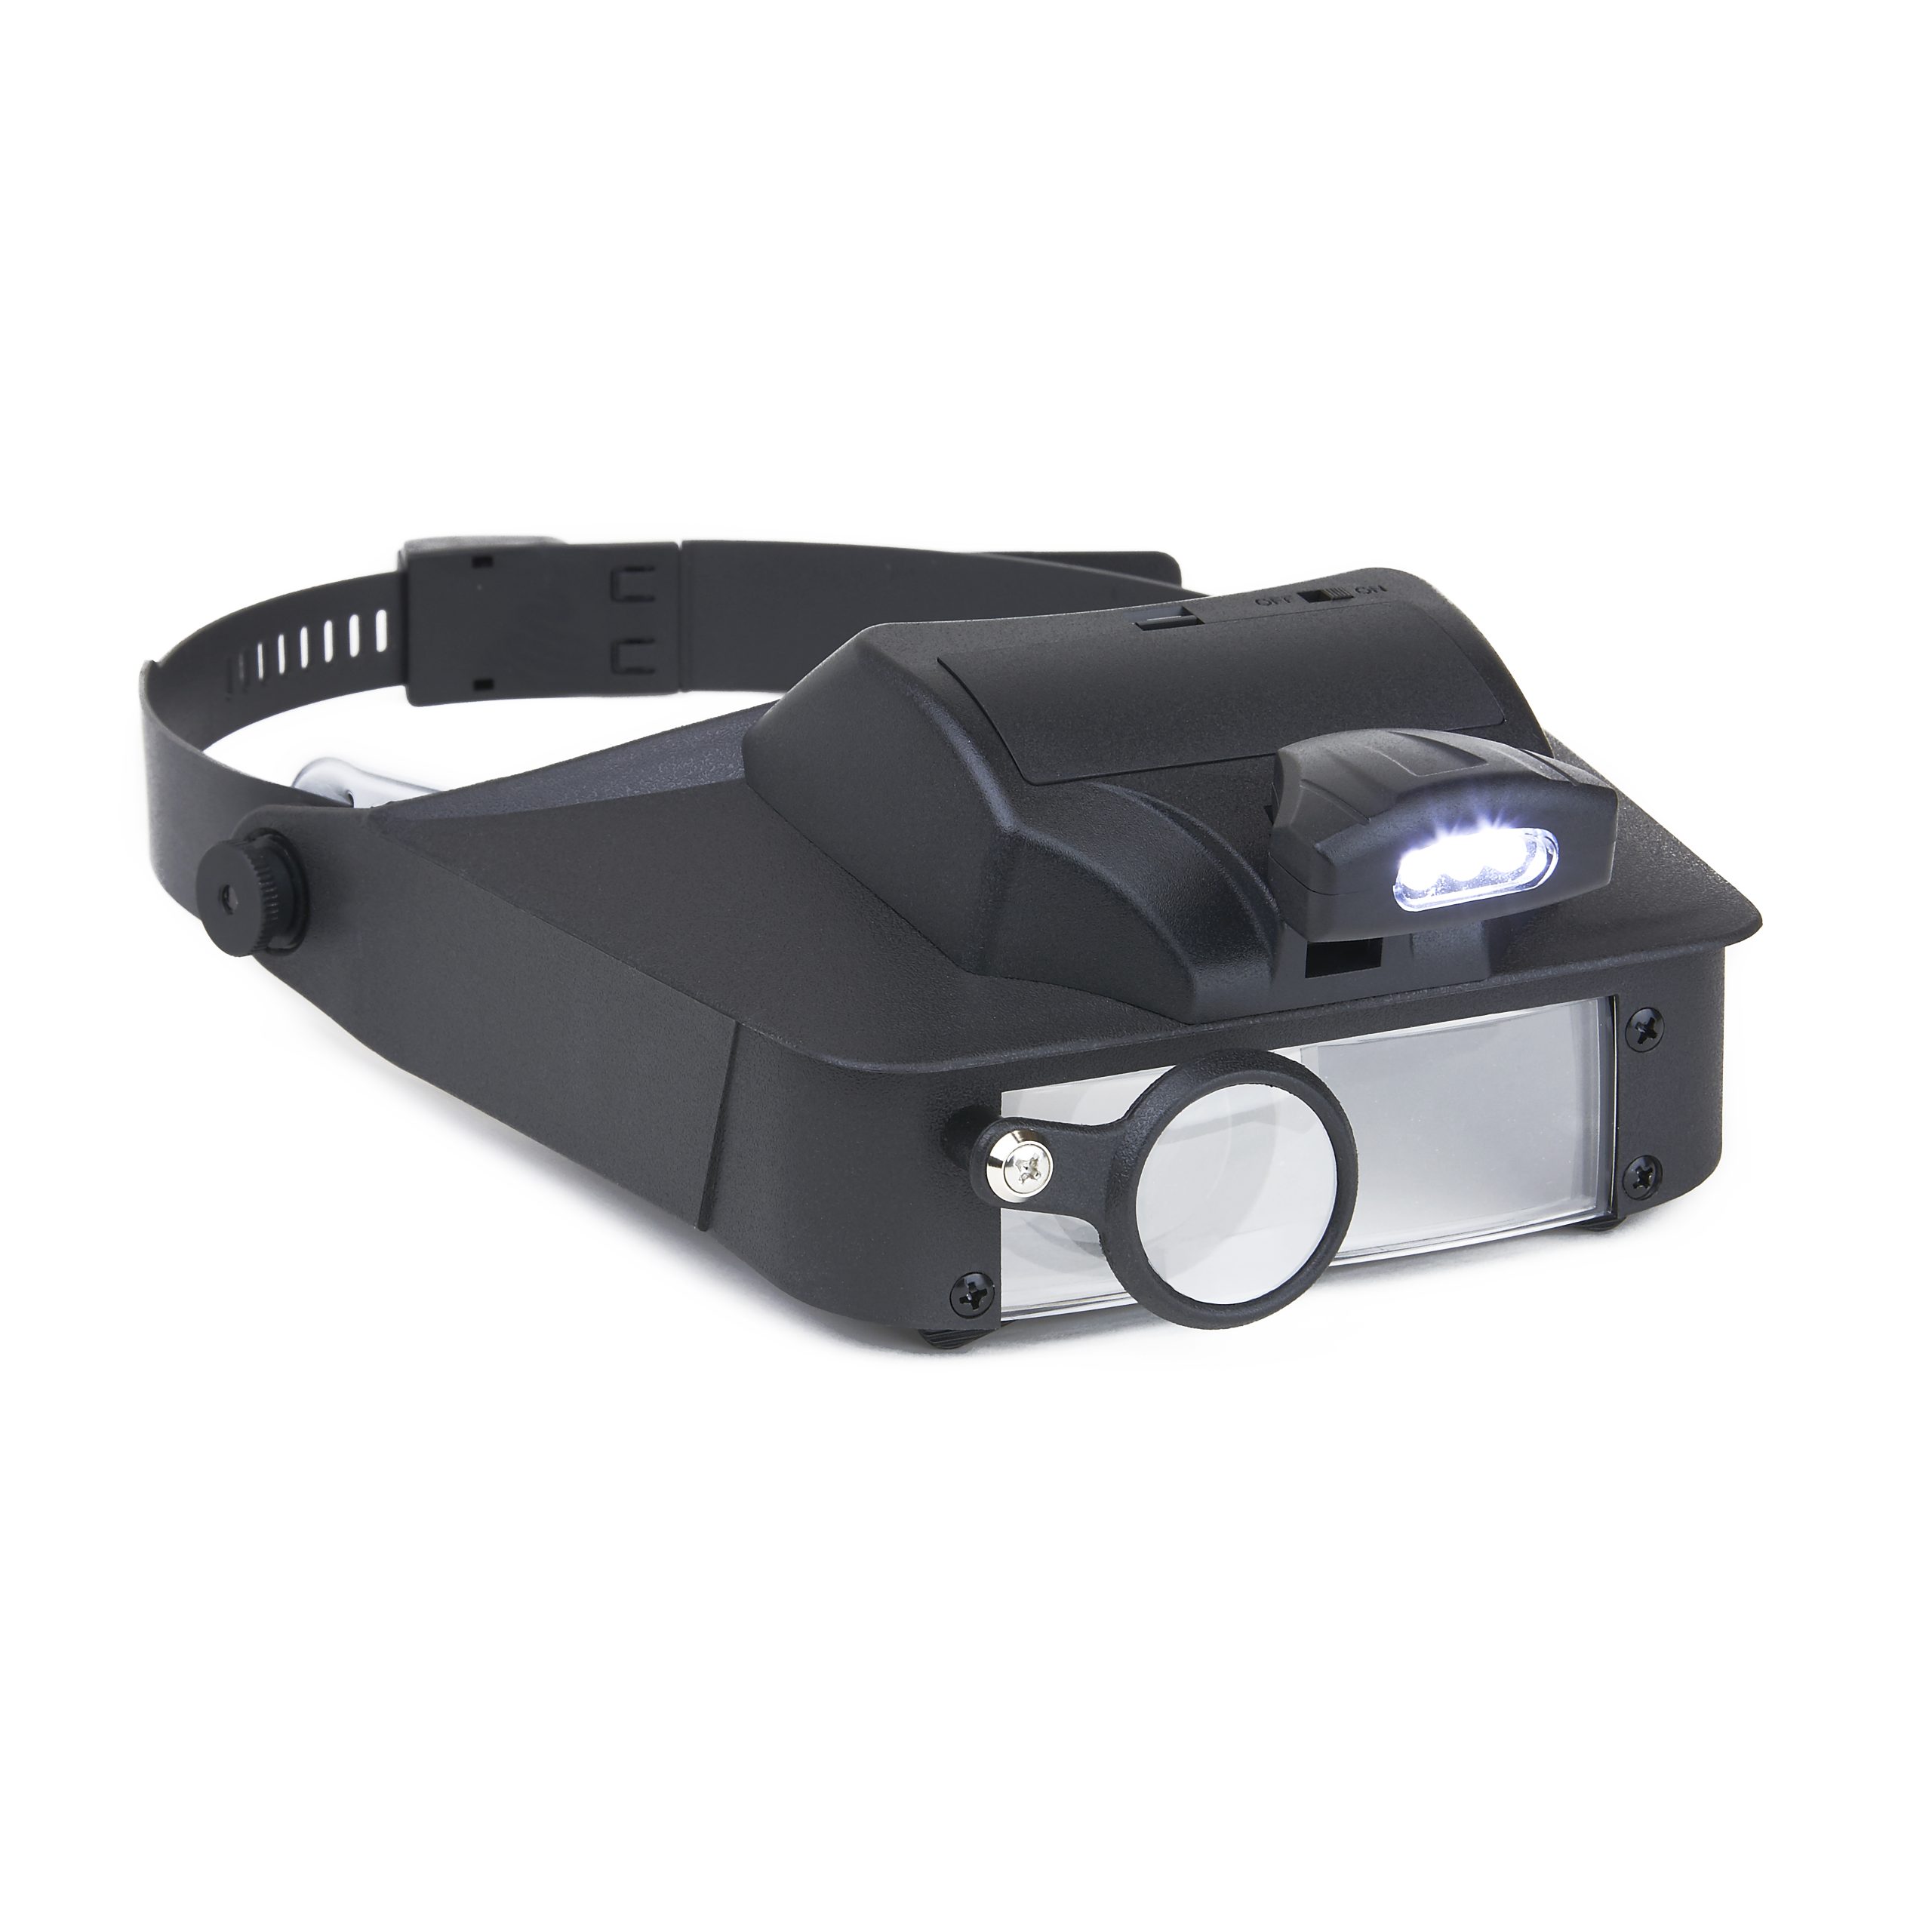 VISIONAID 30X Hands-Free Magnifier with 21 LED Lights - Hobby Edition